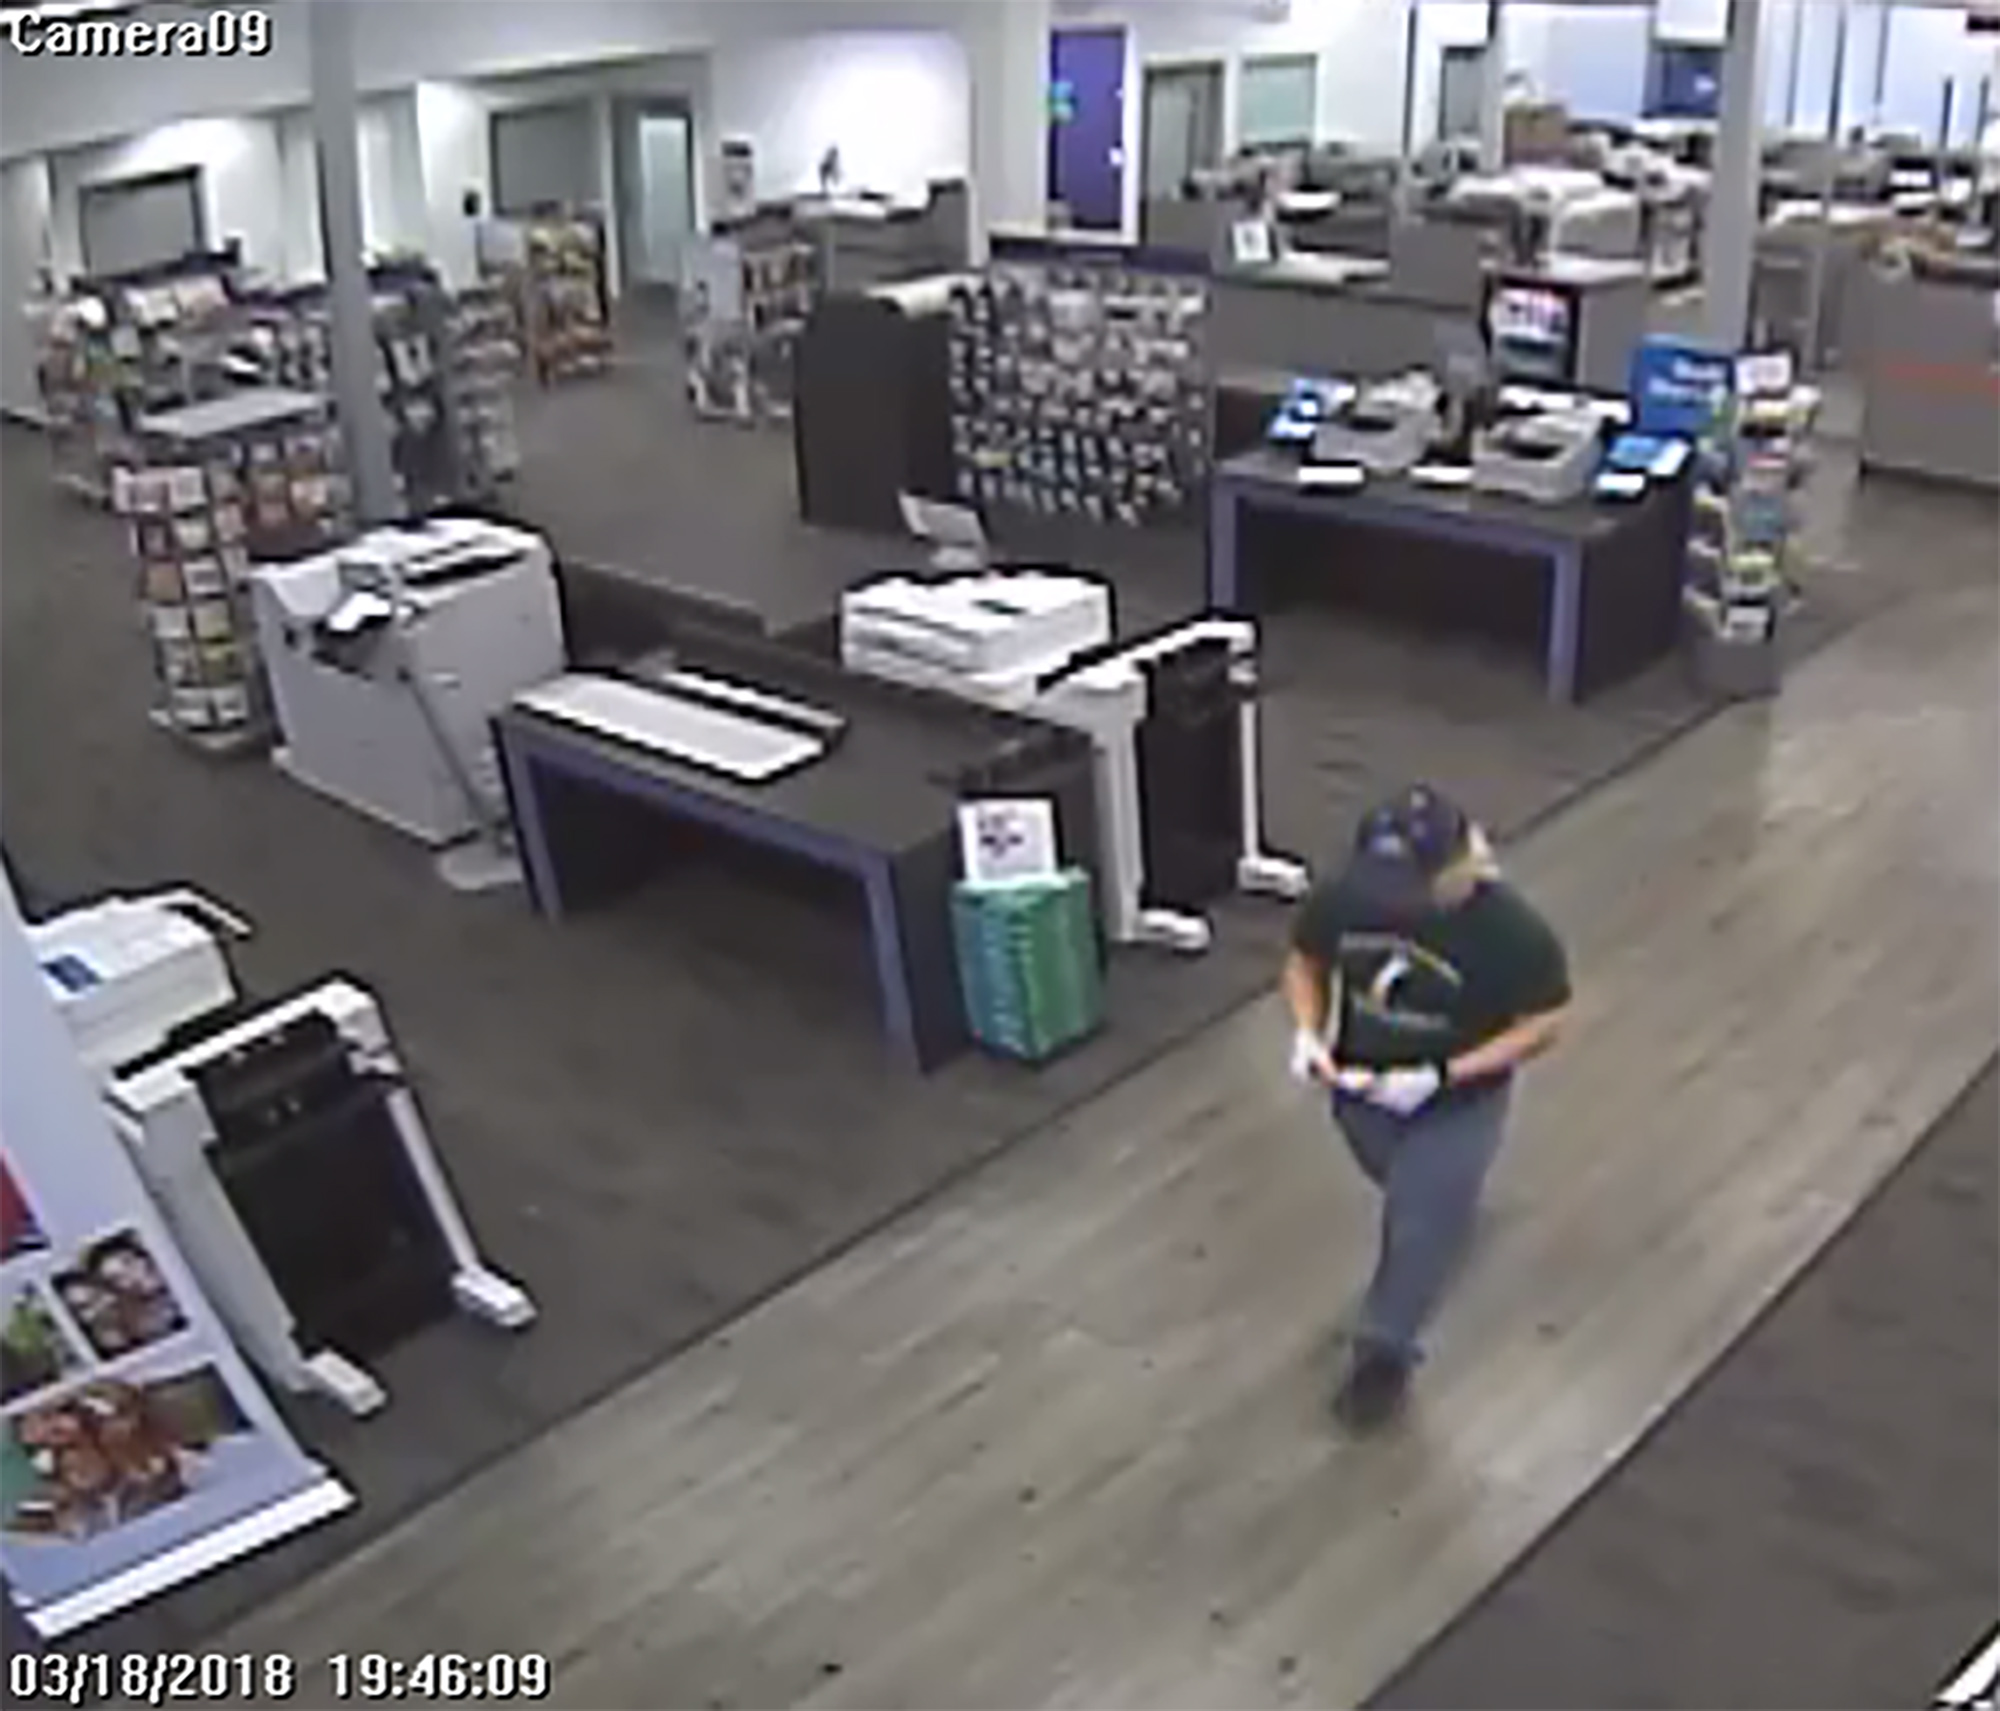 PHOTO: An image made from security camera footage appears to show a man identified by authorities as Austin bombing suspect Mark Conditt shipping two packages at a FedEx store on March 18, 2018.